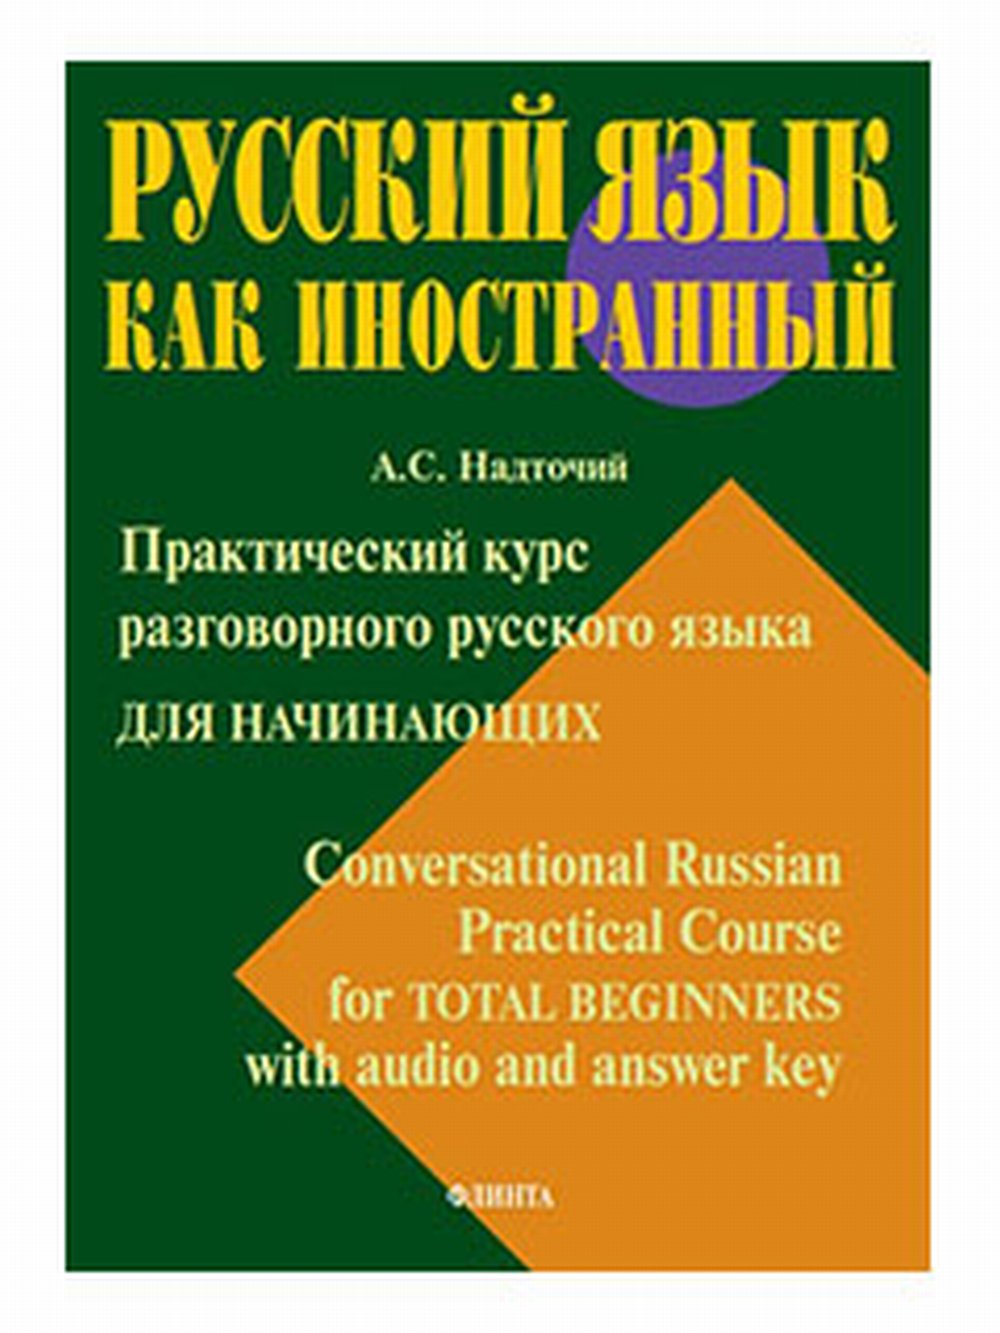       . (Conversational Russian Practical Course for Total Beginners with audio and answer key)